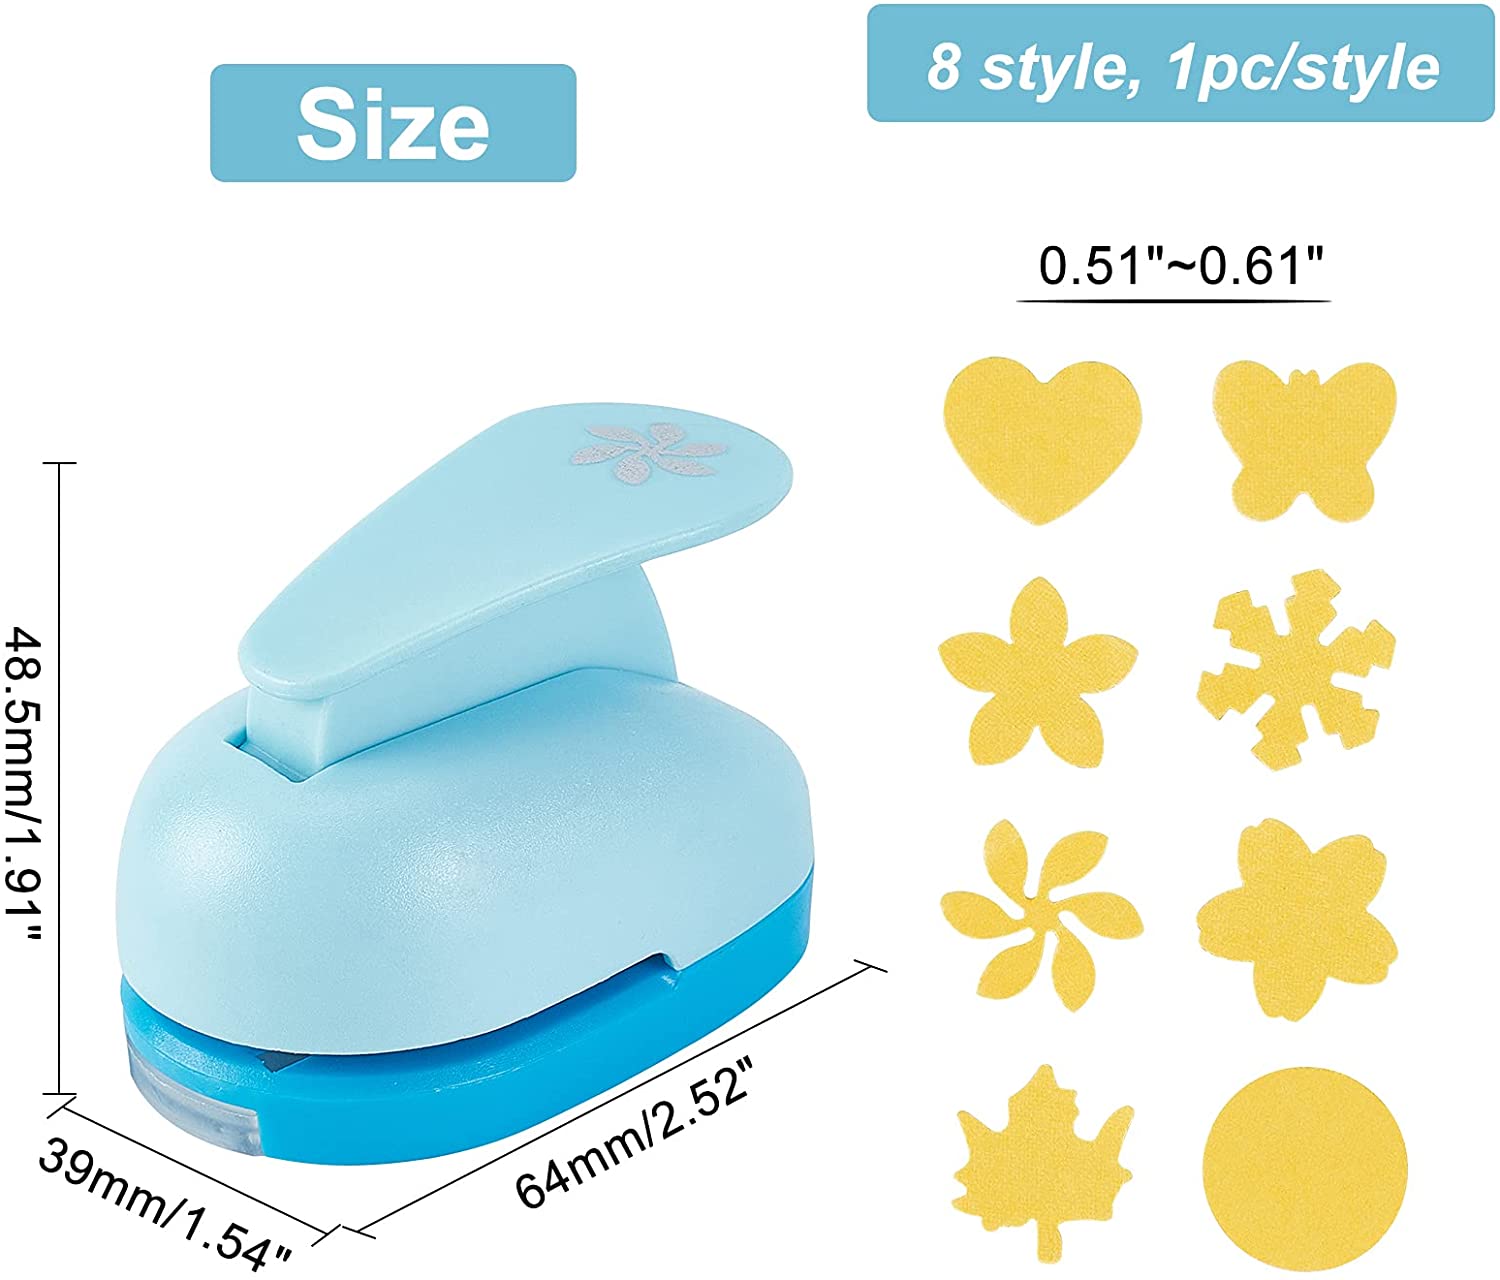 Hole Puncher - Paper Punches for Crafting, Hole Punch Shapes, Star Hole  Puncher, Hole Puncher for Crafts, Craft Supplies